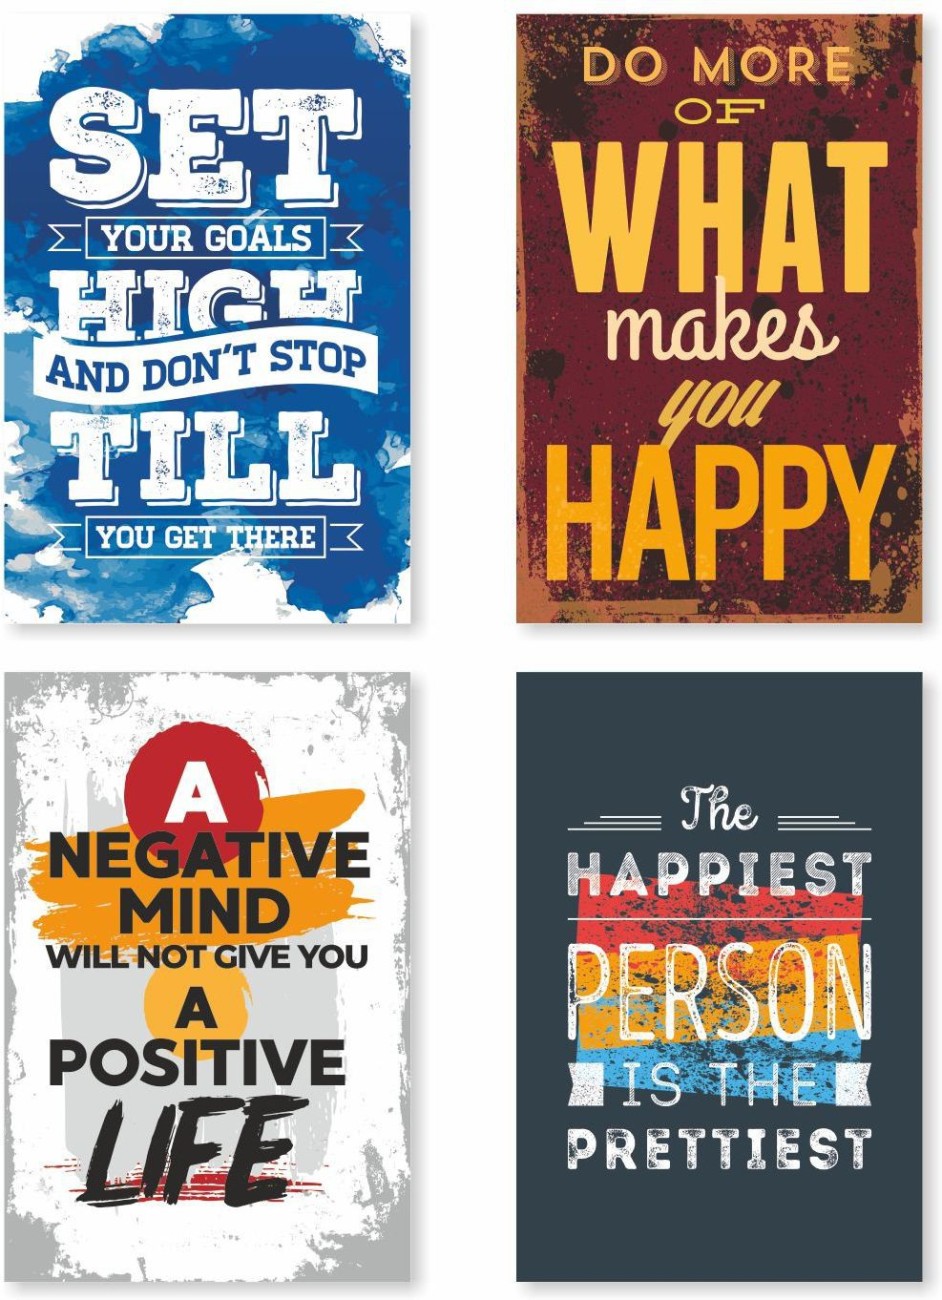 20+ Motivational Quotes for Students